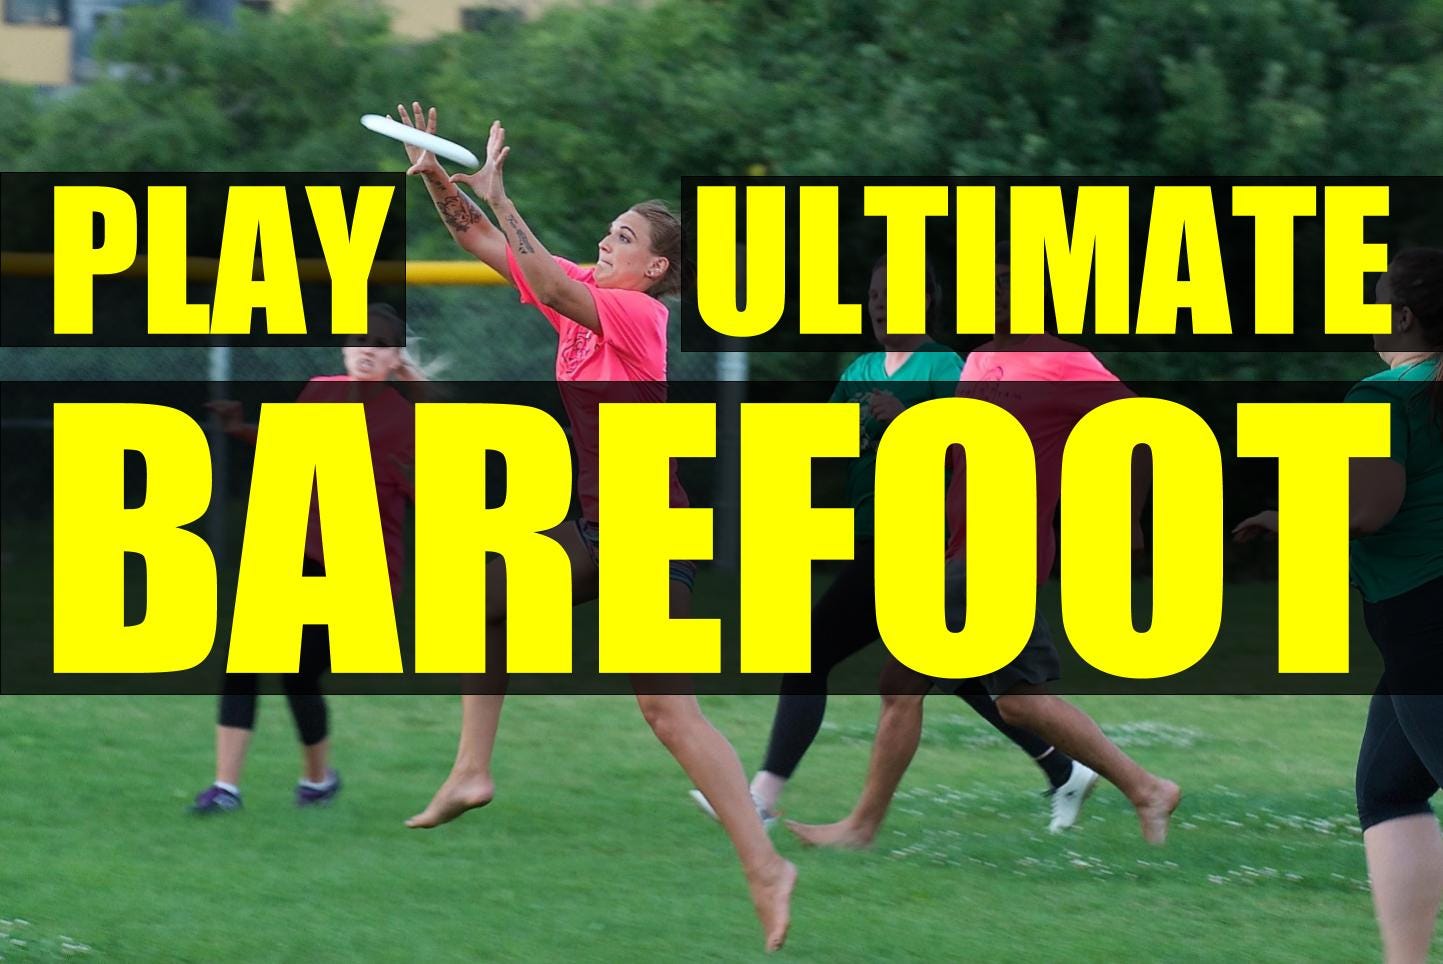 Play Ultimate Frisbee Barefoot — 11 Reasons To Give Up Cleats | by Ryan  Lowe | Medium